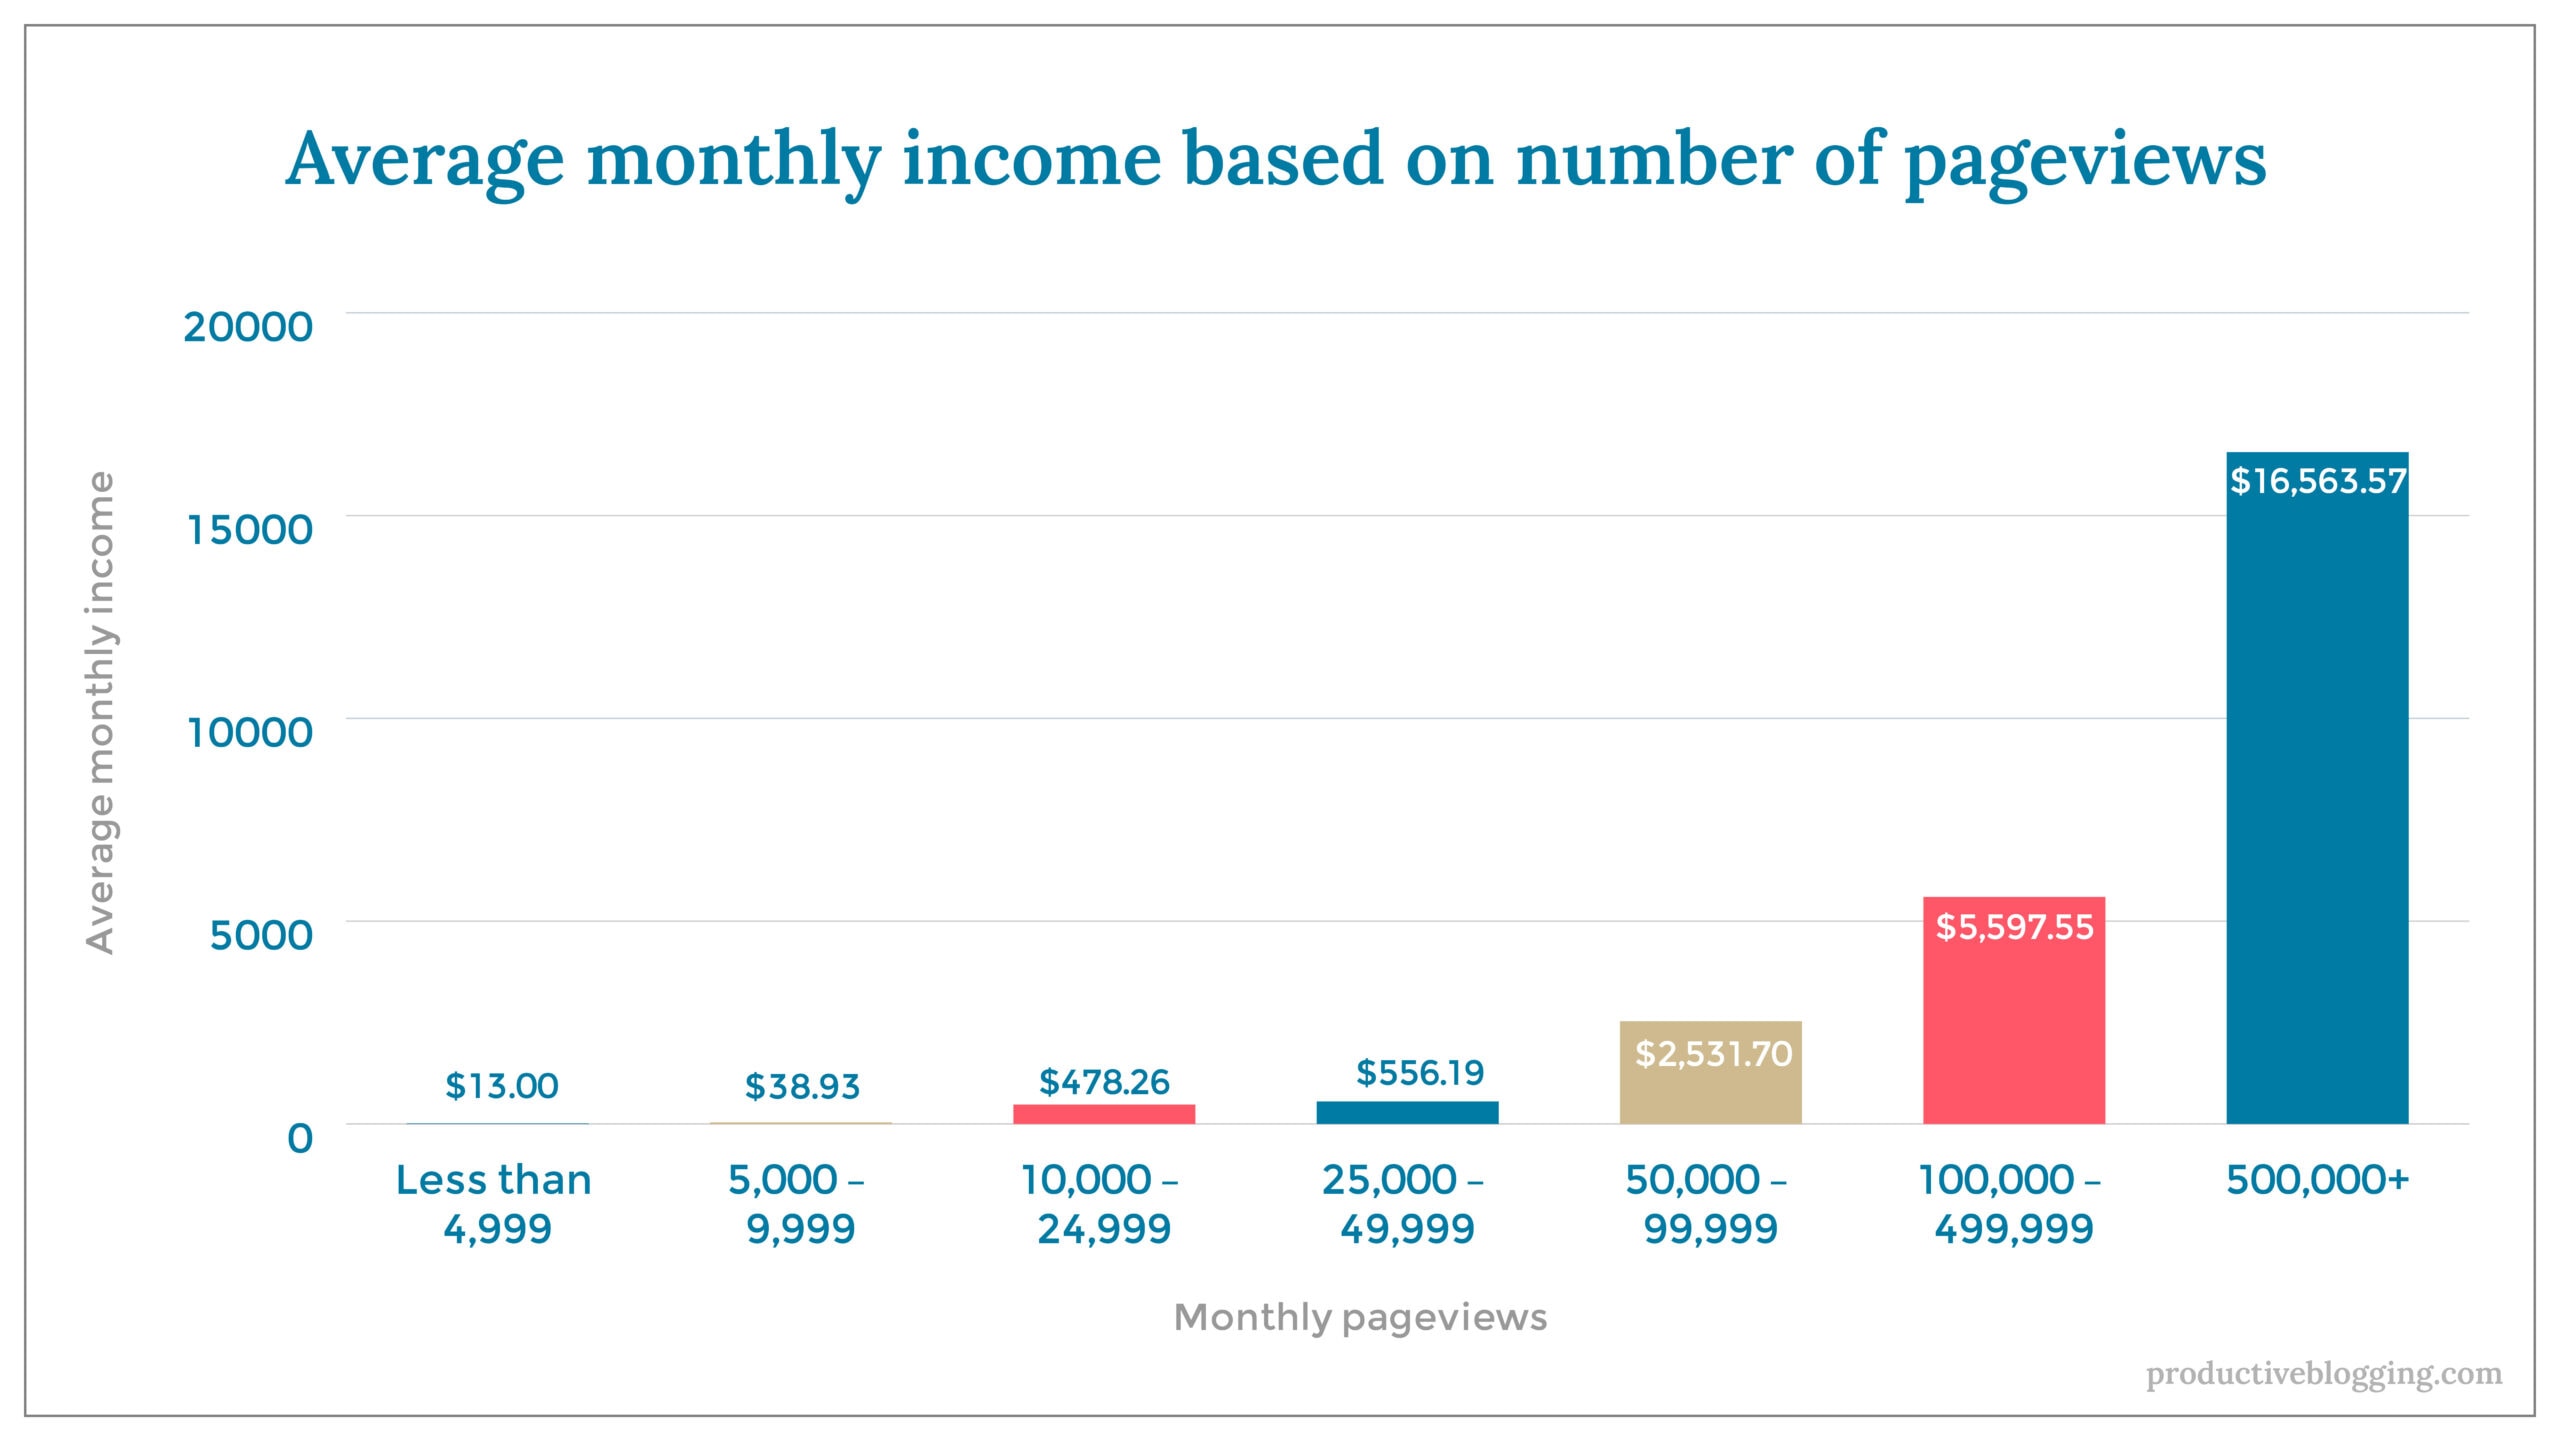 Average monthly income based on number of pageviewsX axis: Monthly pageviewsY axis: Average monthly incomeLess than 4,999		$13.005,000 – 9,999		$38.9310,000 – 24,999		$478.2625,000 – 49,999		$556.1950,000 – 99,999		$2,531.70100,000 – 499,999	$5,597.55500,000+		$16,563.57